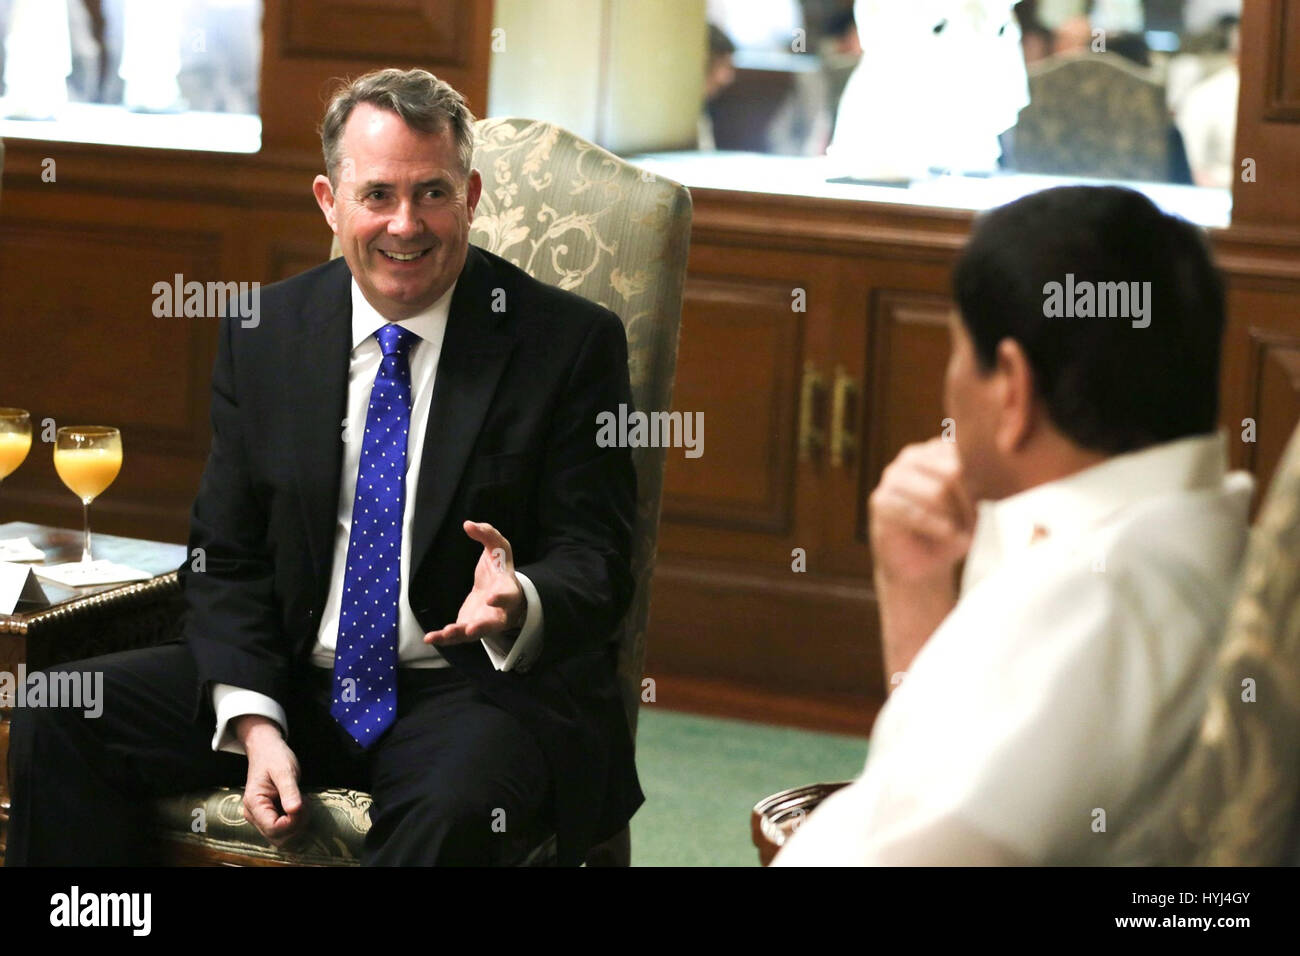 Manila, Phillipines. 4th Apr, 2017. Philippine President Rodrigo Duterte meets with British Secretary of State for International Trade Liam Fox, left, at the Music Room of the Malacanang Palace April 3, 2017 in Manila, Philippines. Credit: Planetpix/Alamy Live News Stock Photo